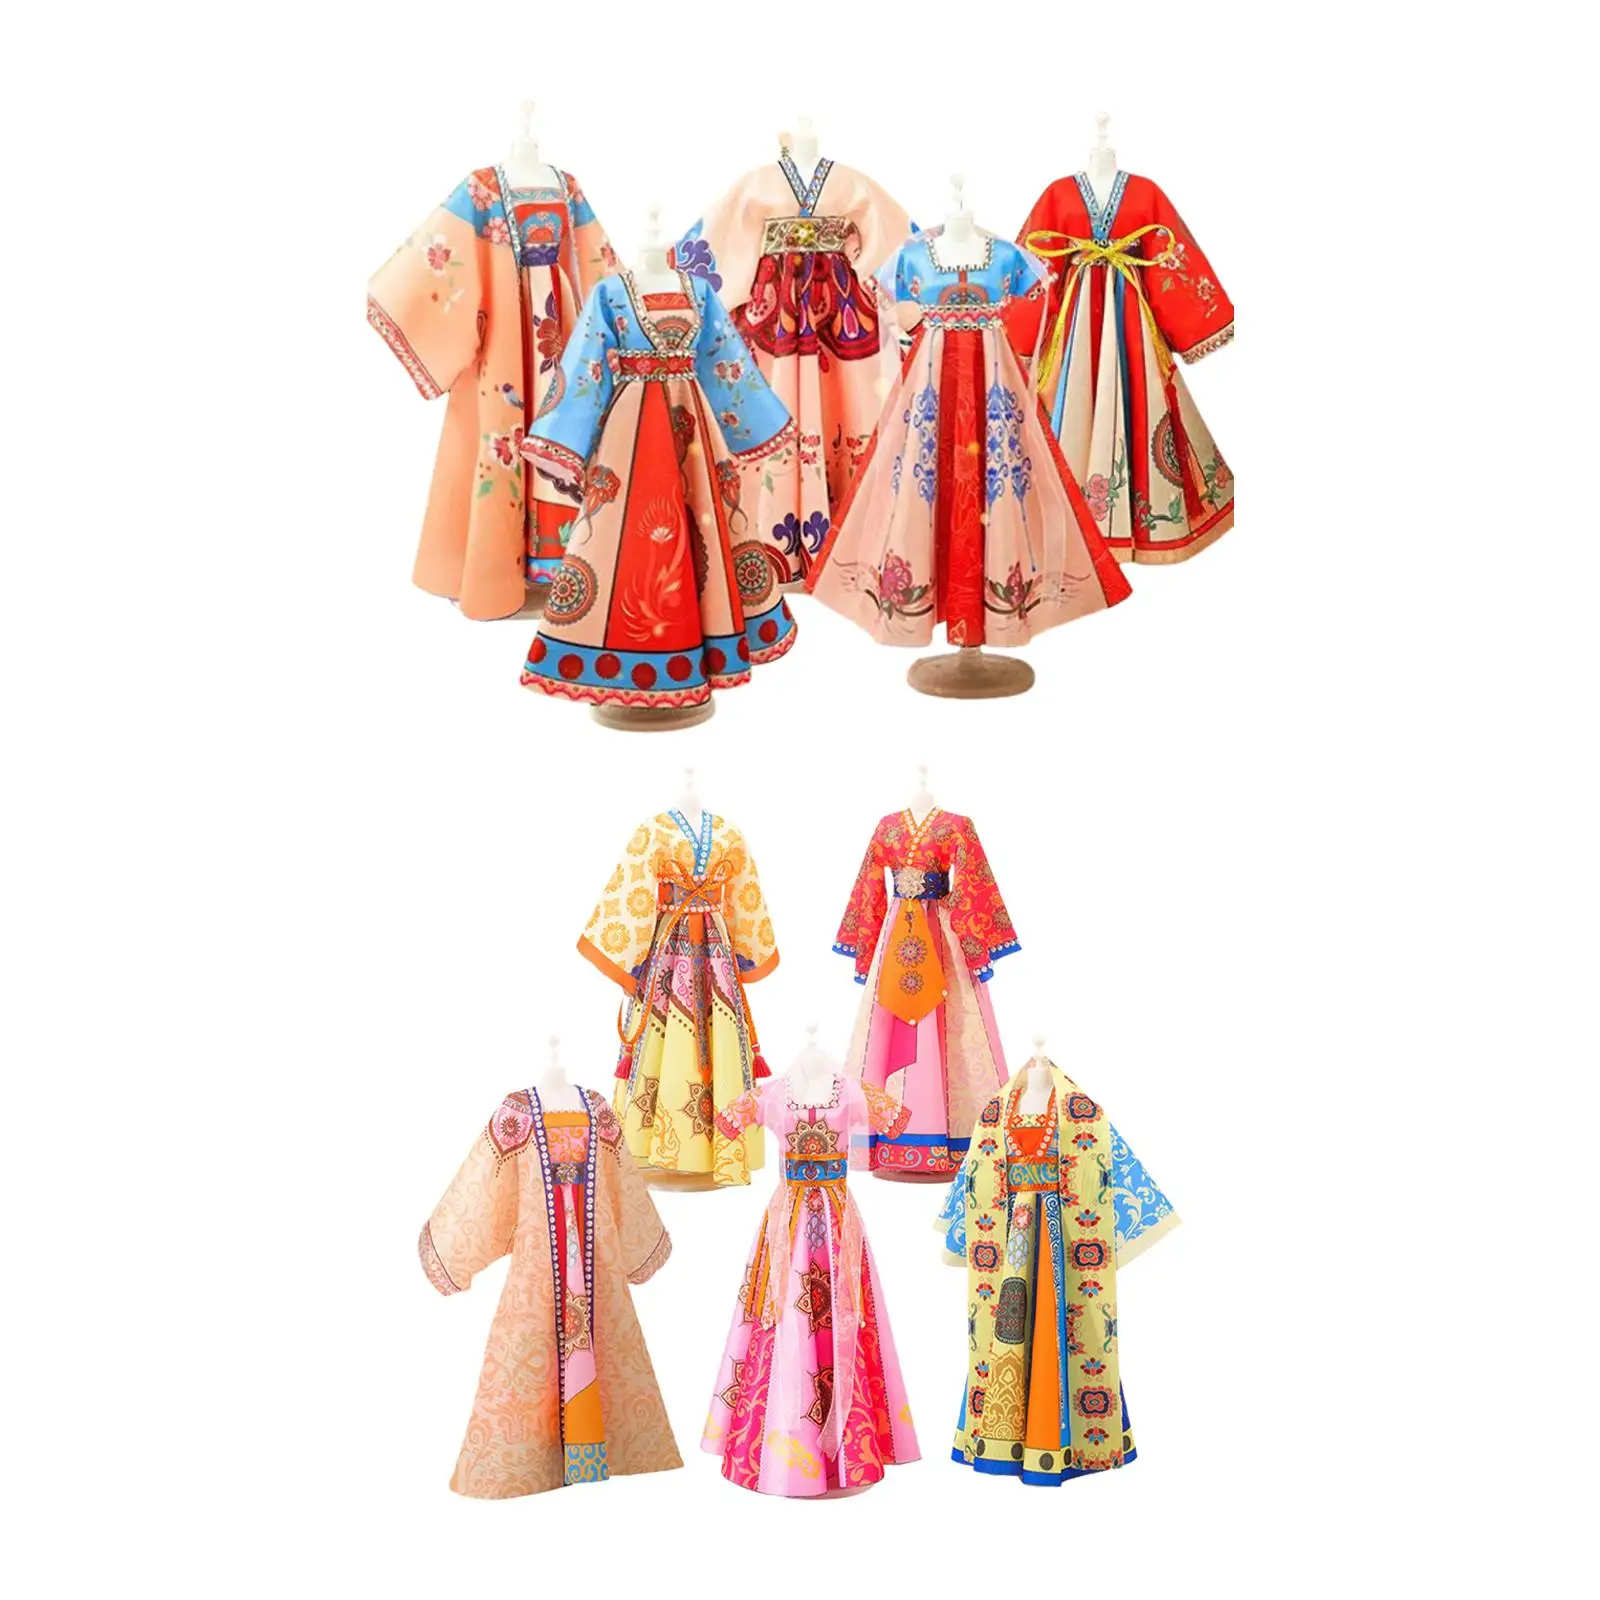 Fashion Design Kits Learning Toys Valentines Day Gifts for Kids Birthday Gifts Doll Clothing Design for Age 6 7 8 9 10 11 12